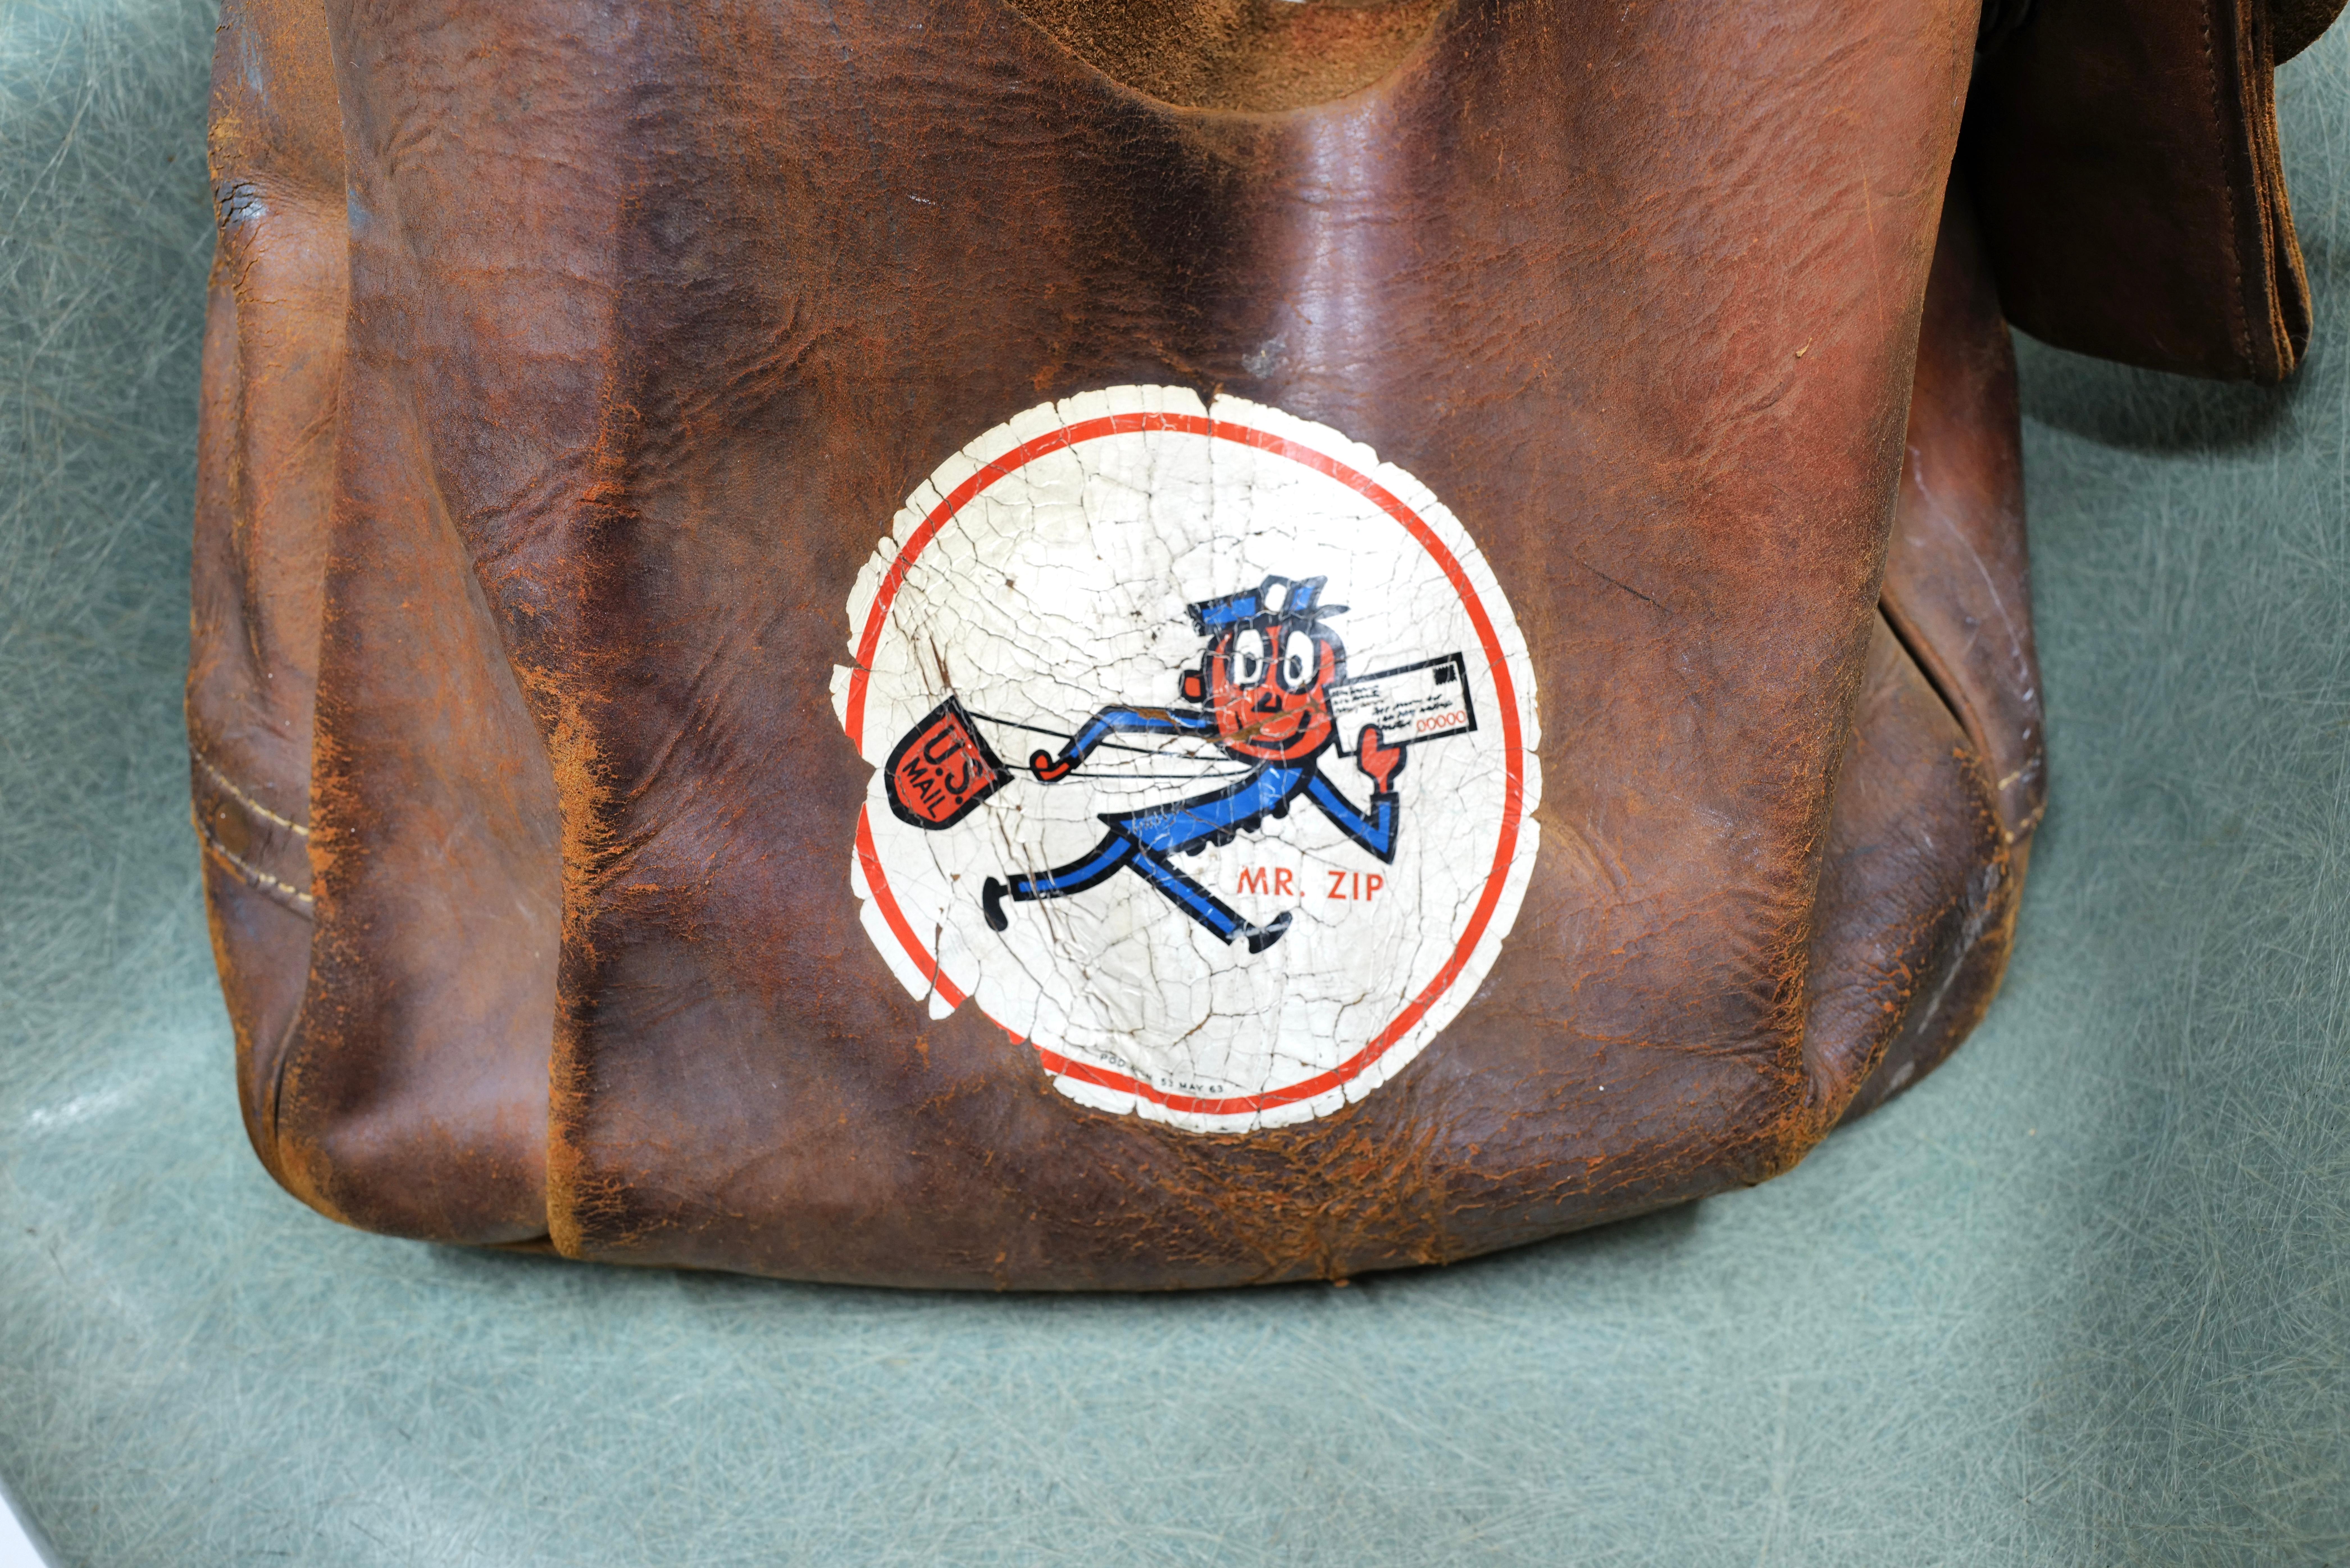 Behold, the vintage 1964 Leather Mr. Zip Postal Mail Bag, a timeless relic of postal history. Crafted from supple leather, this bag exudes a sense of elegance and durability, reminiscent of a bygone era. Adorned with the iconic Mr. Zip logo, it